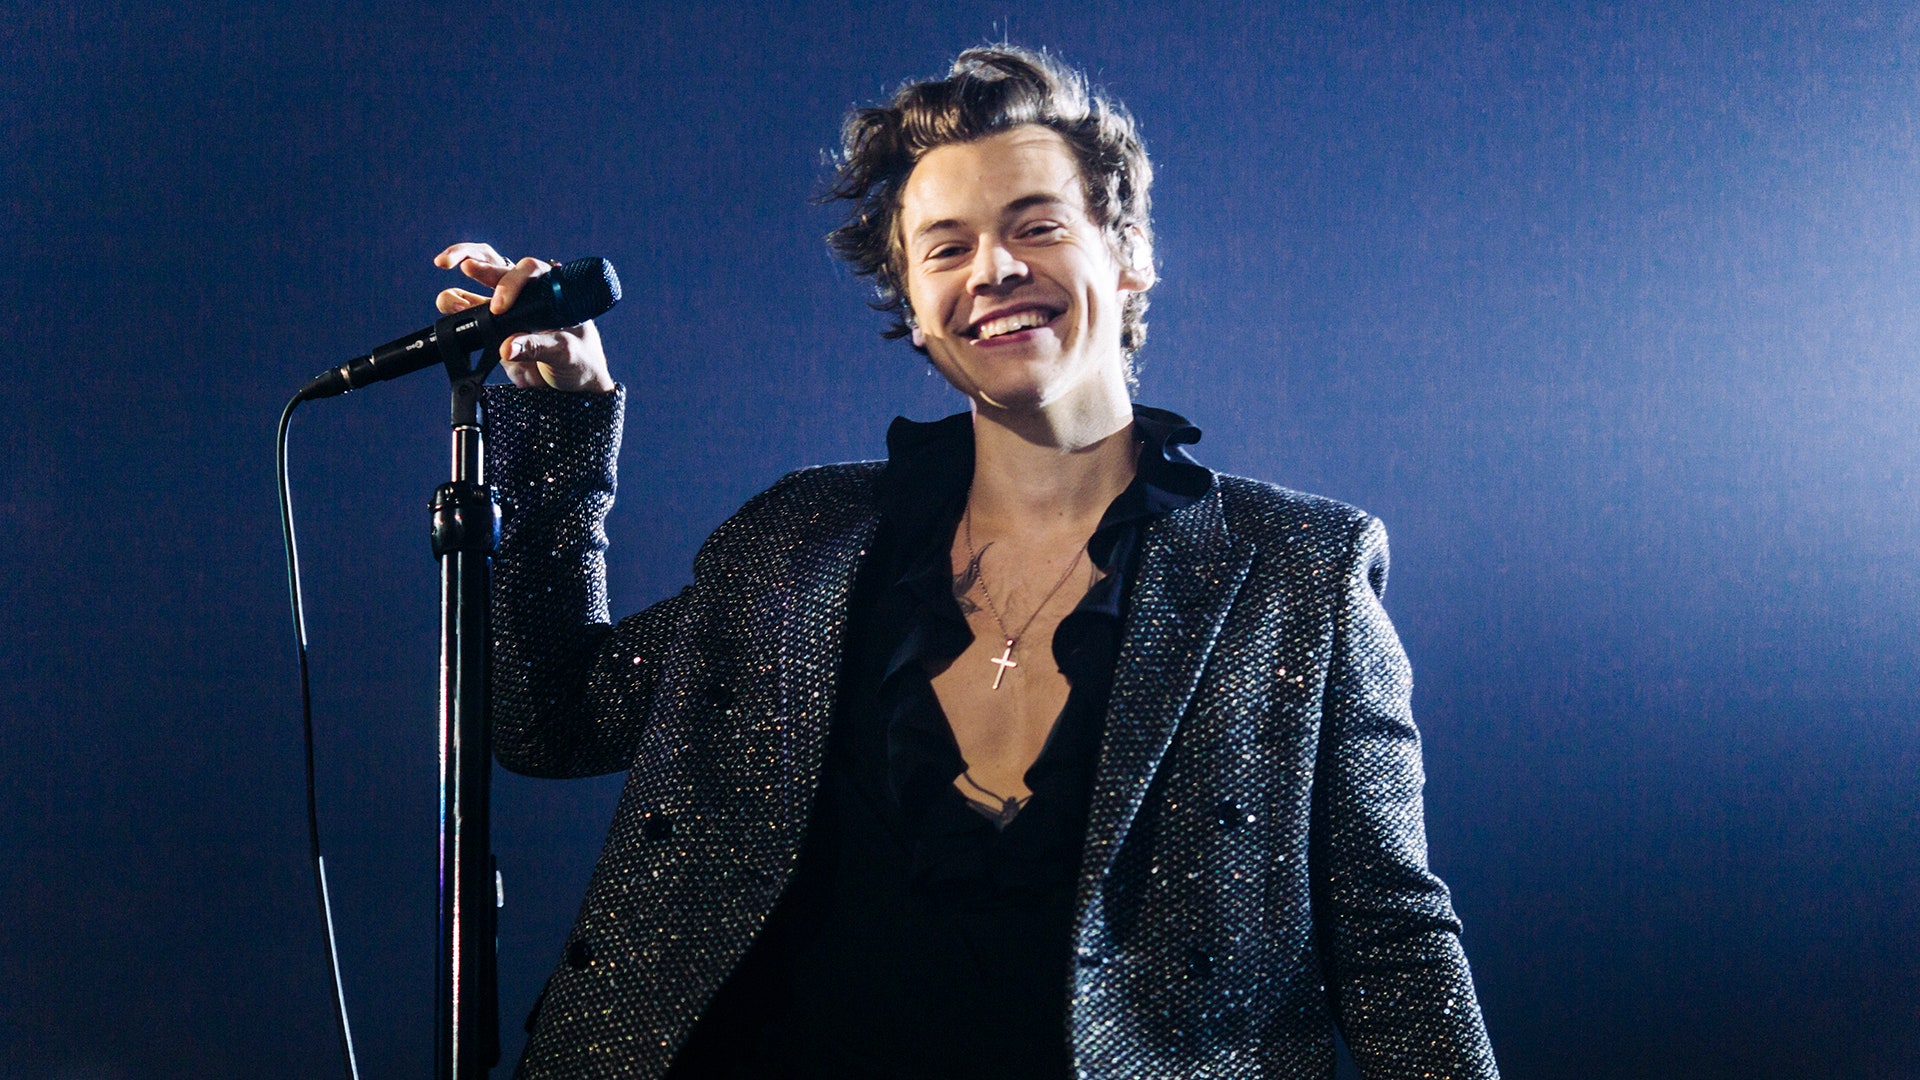 A man in black suit and shirt holding microphone - Harry Styles